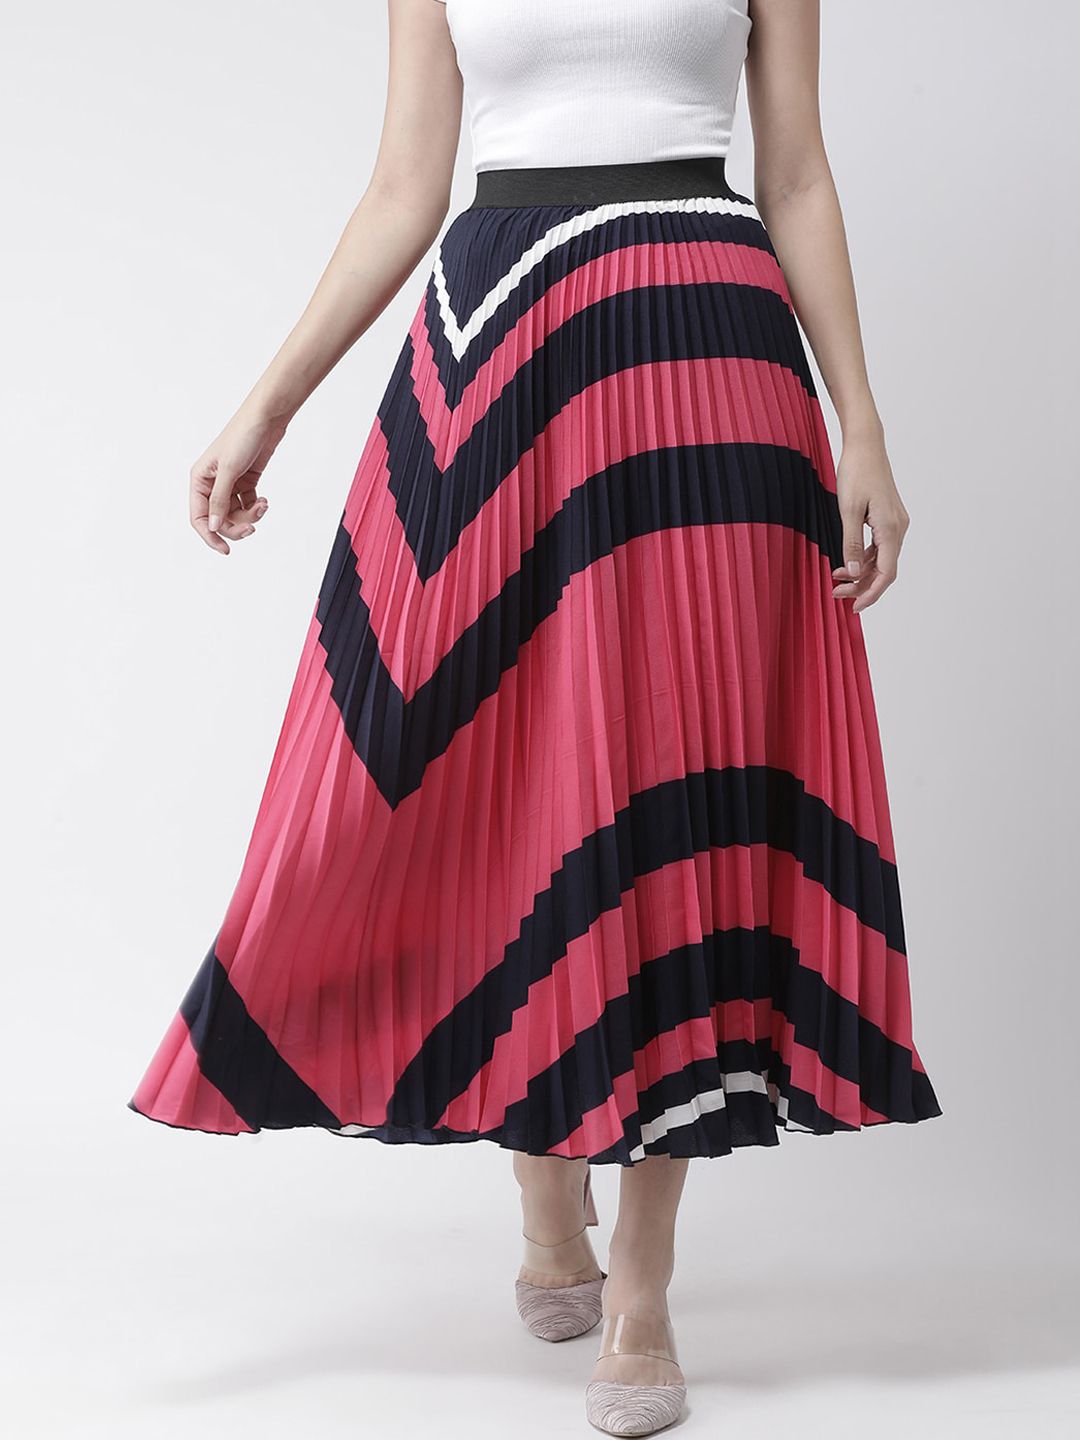 KASSUALLY Pink & Black Colourblocked Pleated A-Line Skirt Price in India